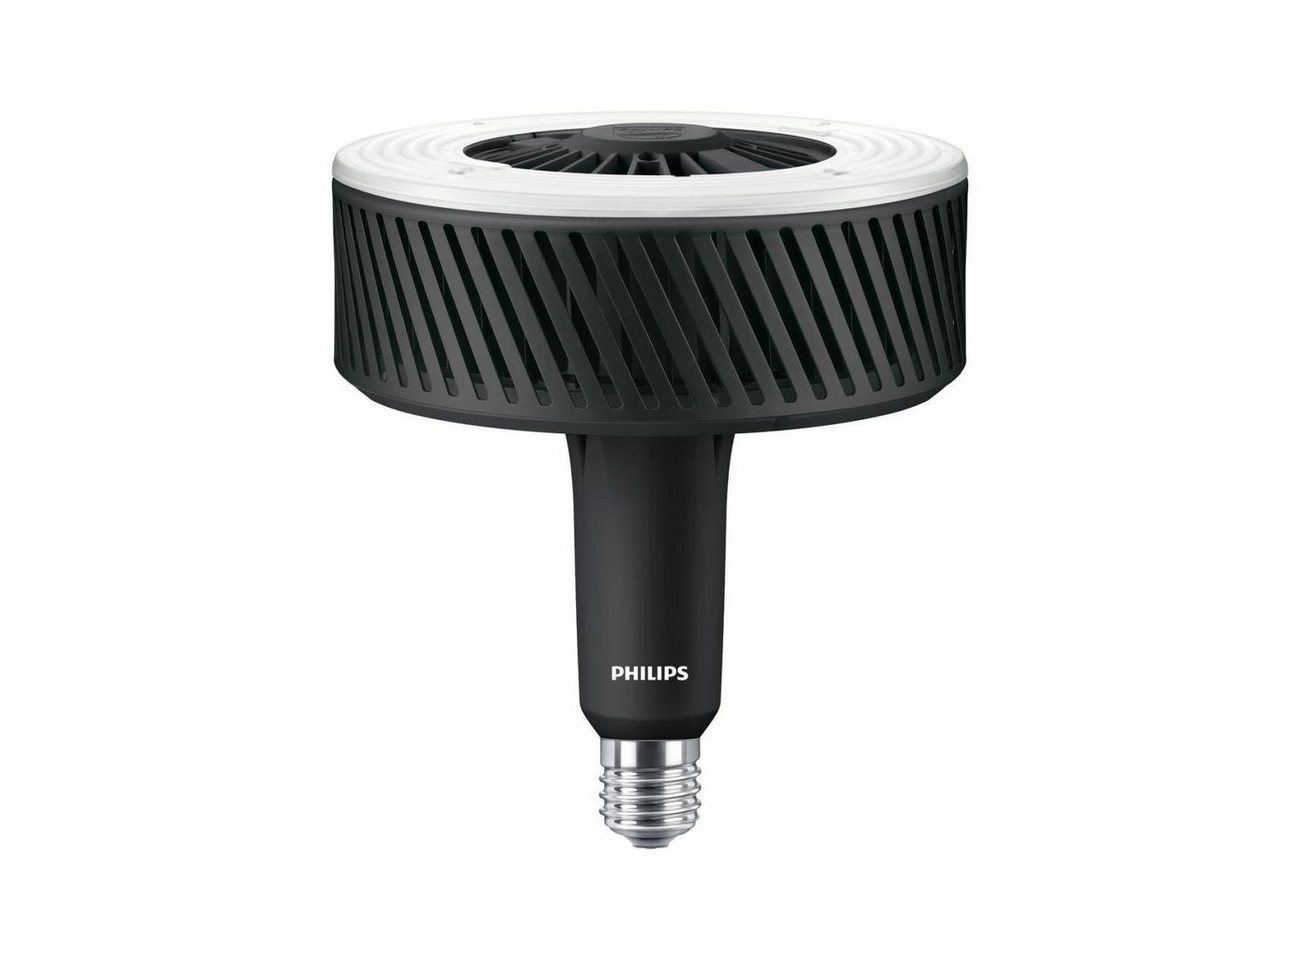 Philips LED-Leuchte PHILIPS LED-Lampe E40 95W A++ 4000K nws 13000lm 12 von Philips